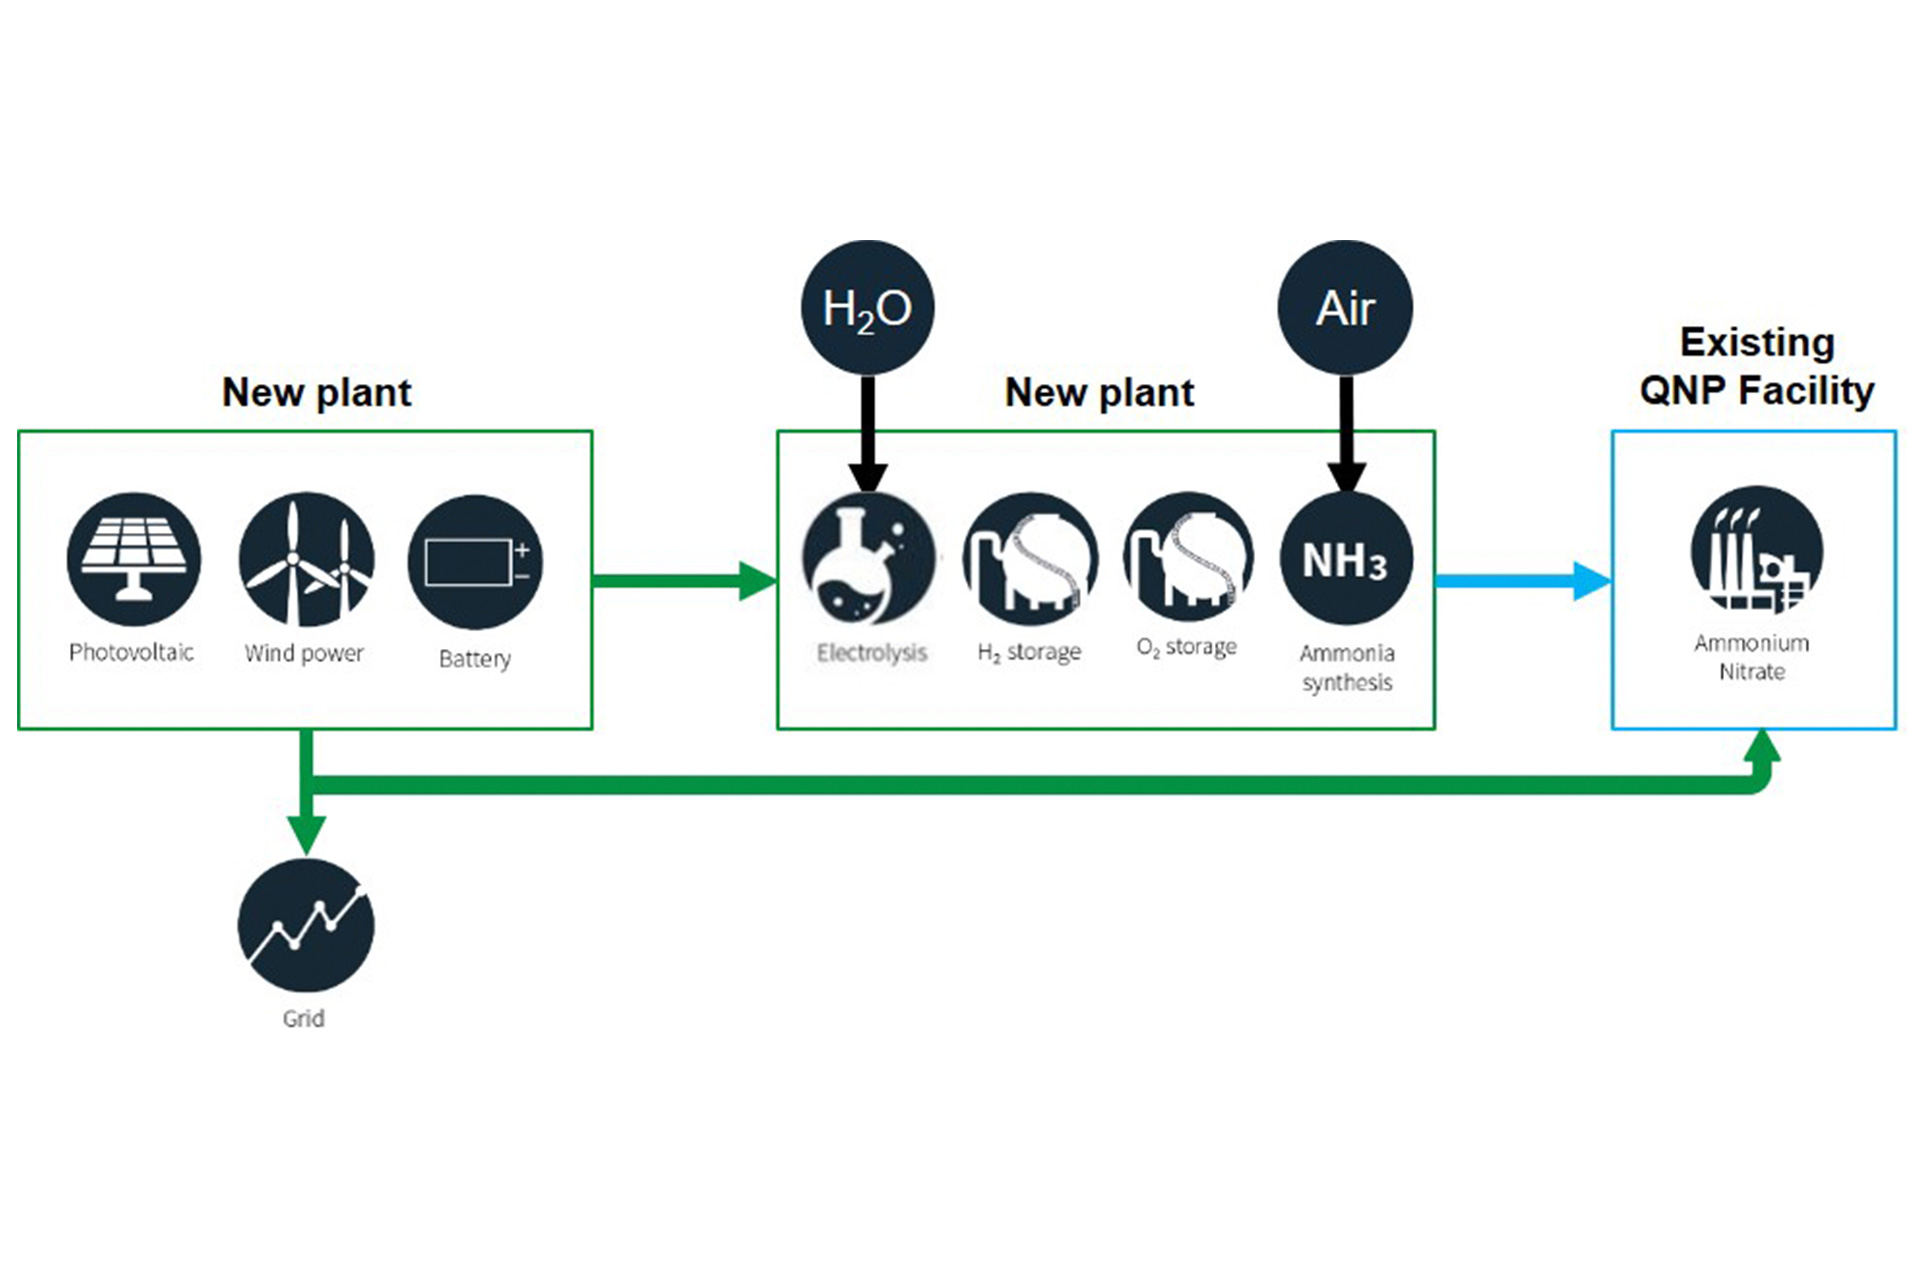 Image - How the Queensland Nitrates plant works